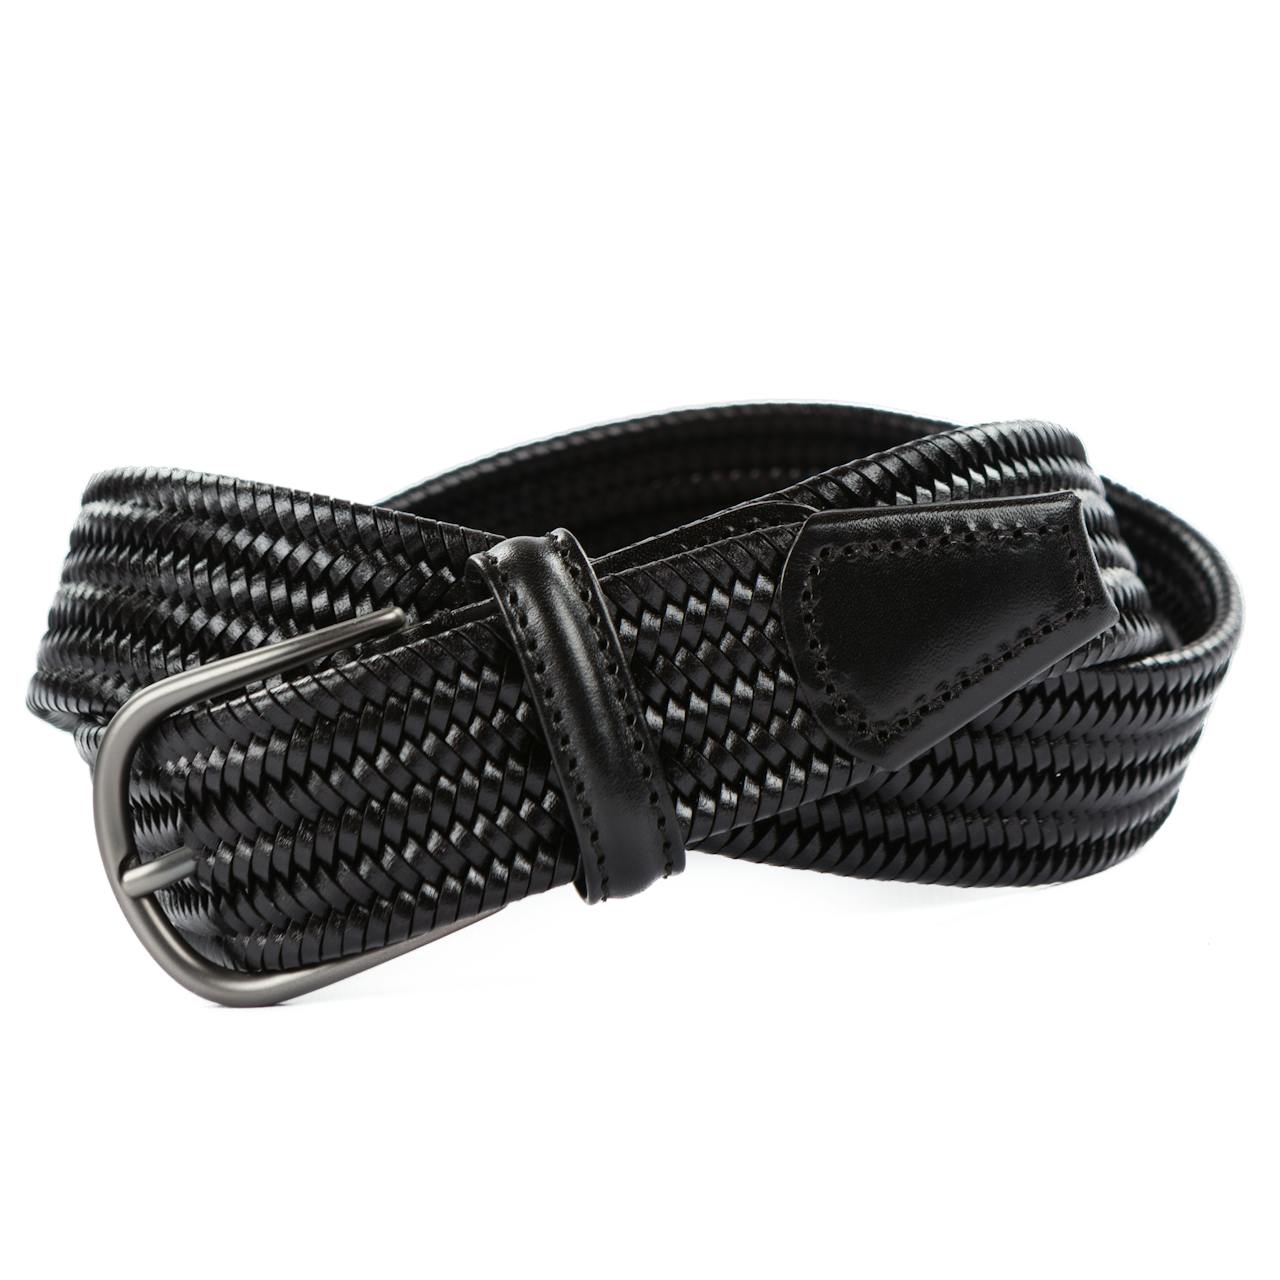 Anderson's Stretch woven leather belt